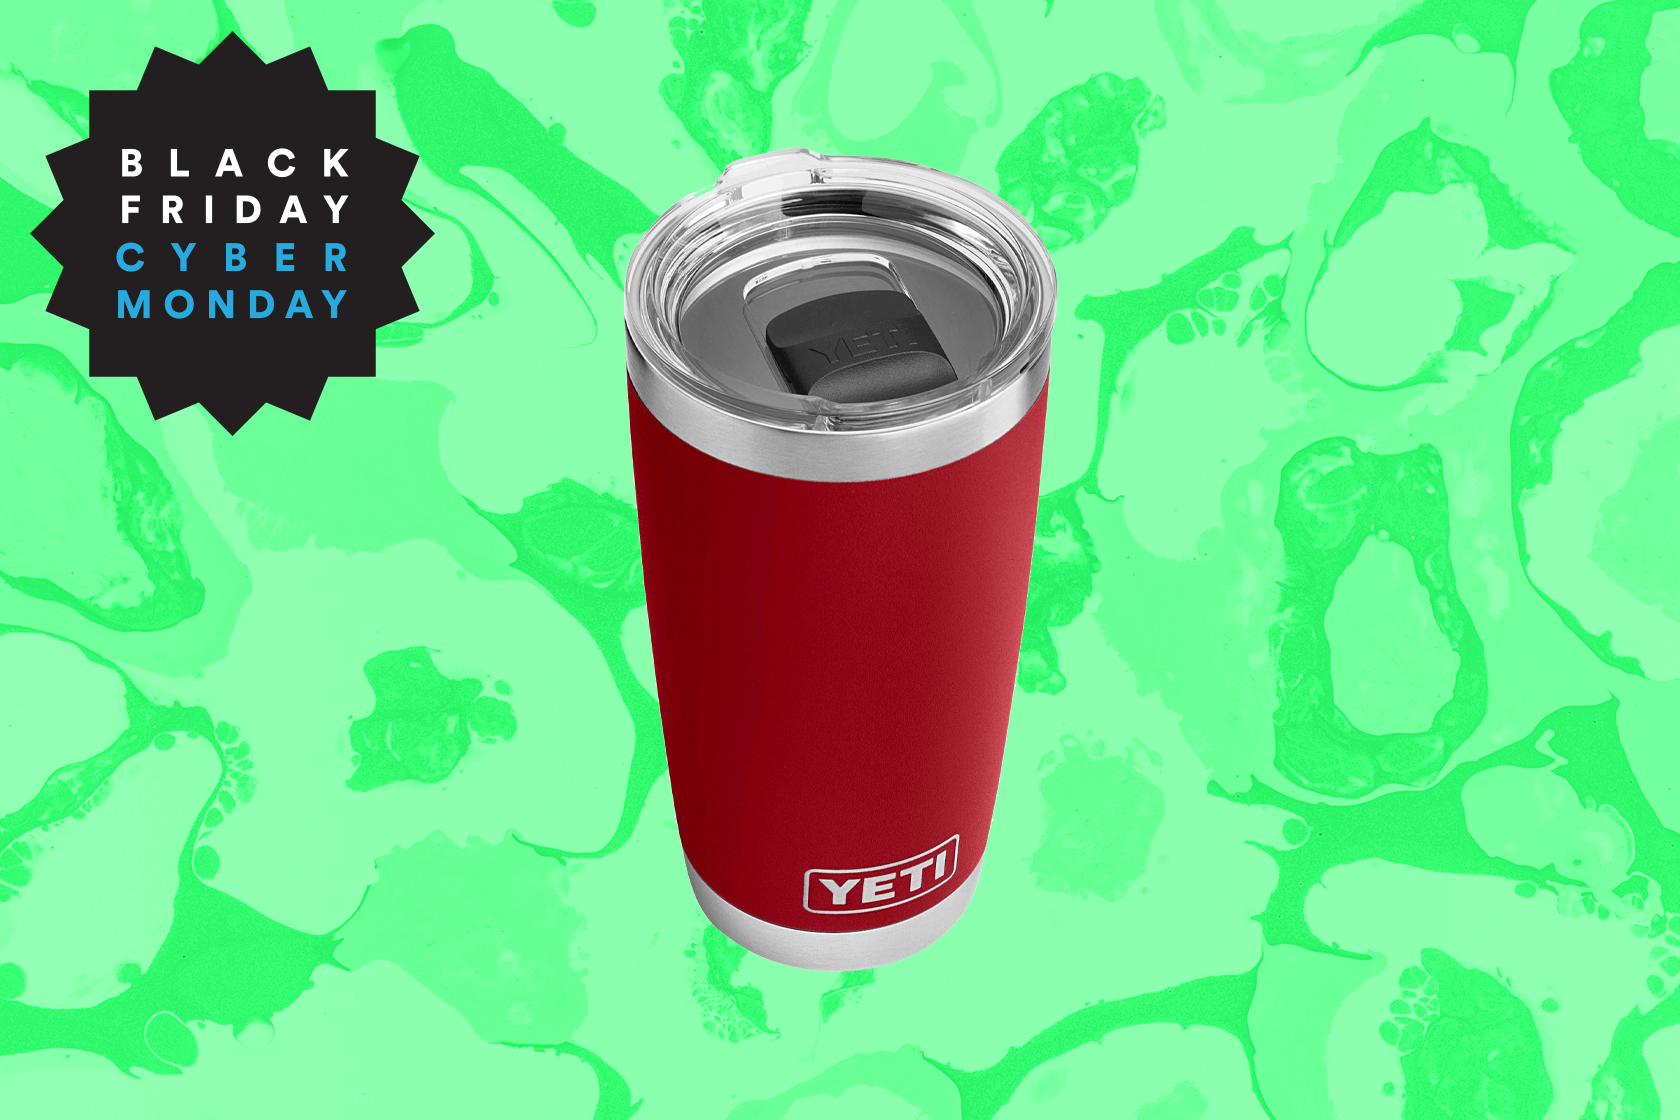 YETI's 20z Tumbler is on sale at Dick's for its lowest-ever price